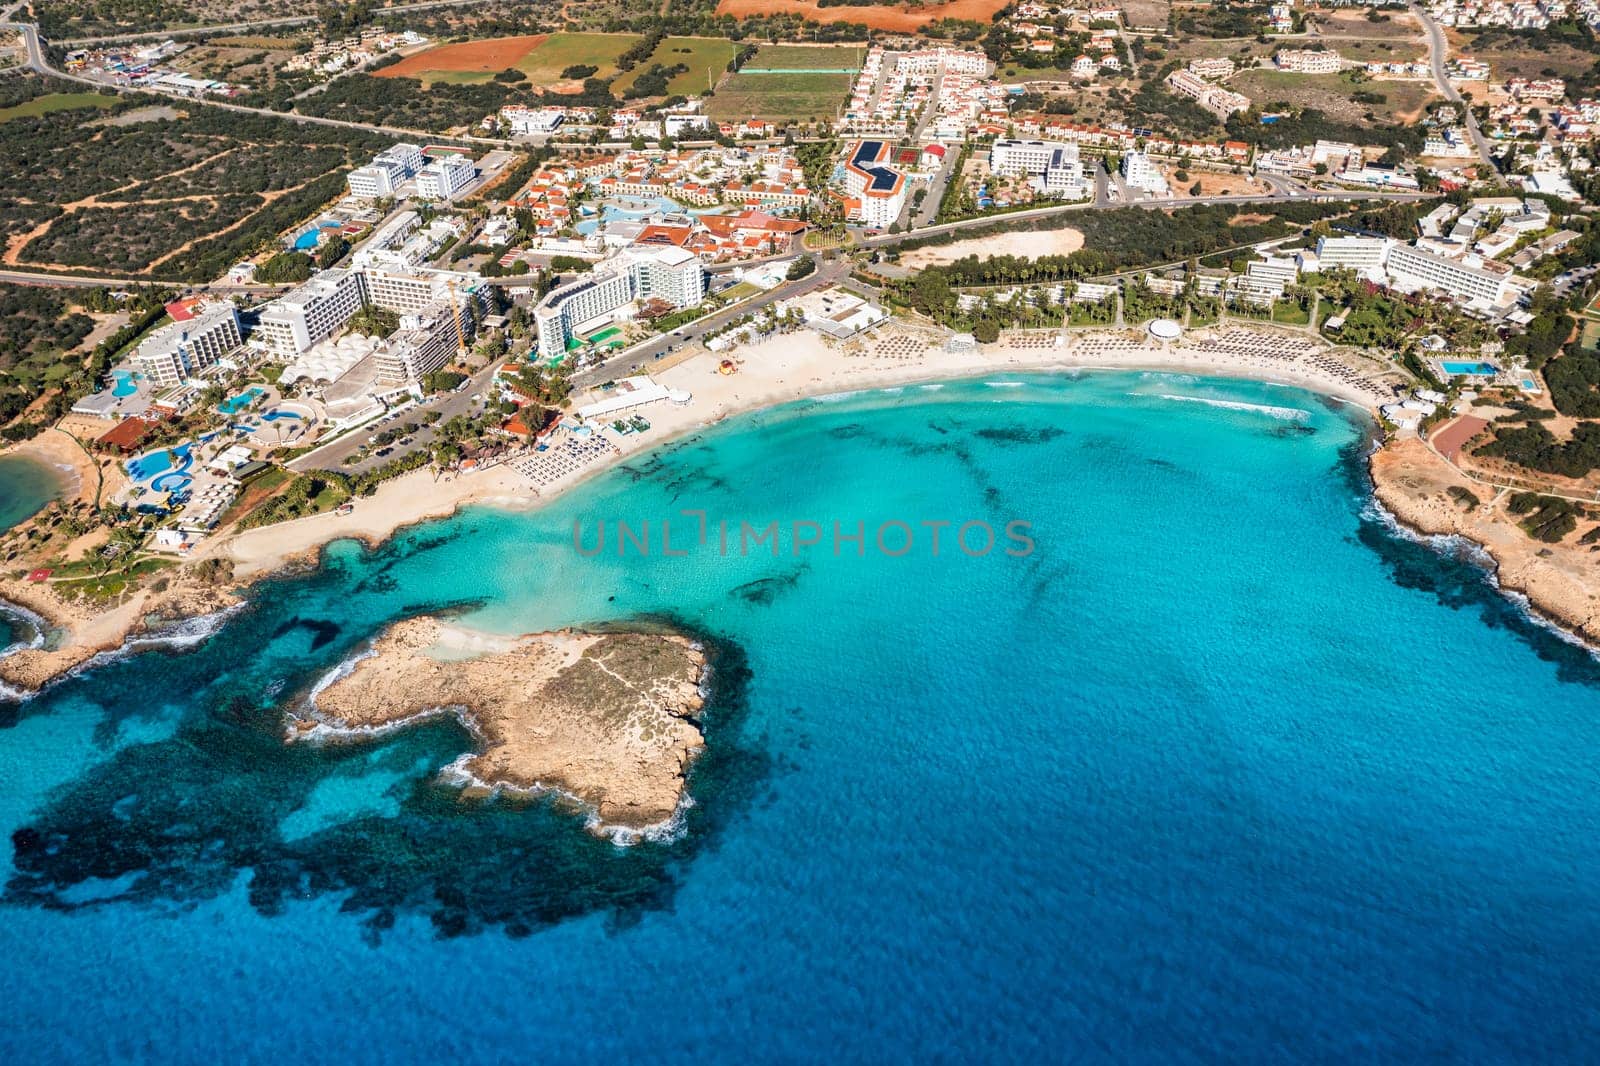 Aerial view of beautiful Nissi beach in Ayia Napa, Cyprus. Nissi beach in Ayia Napa famous tourist beach in Cyprus. A view of a azzure water and Nissi beach in Aiya Napa, Cyprus.